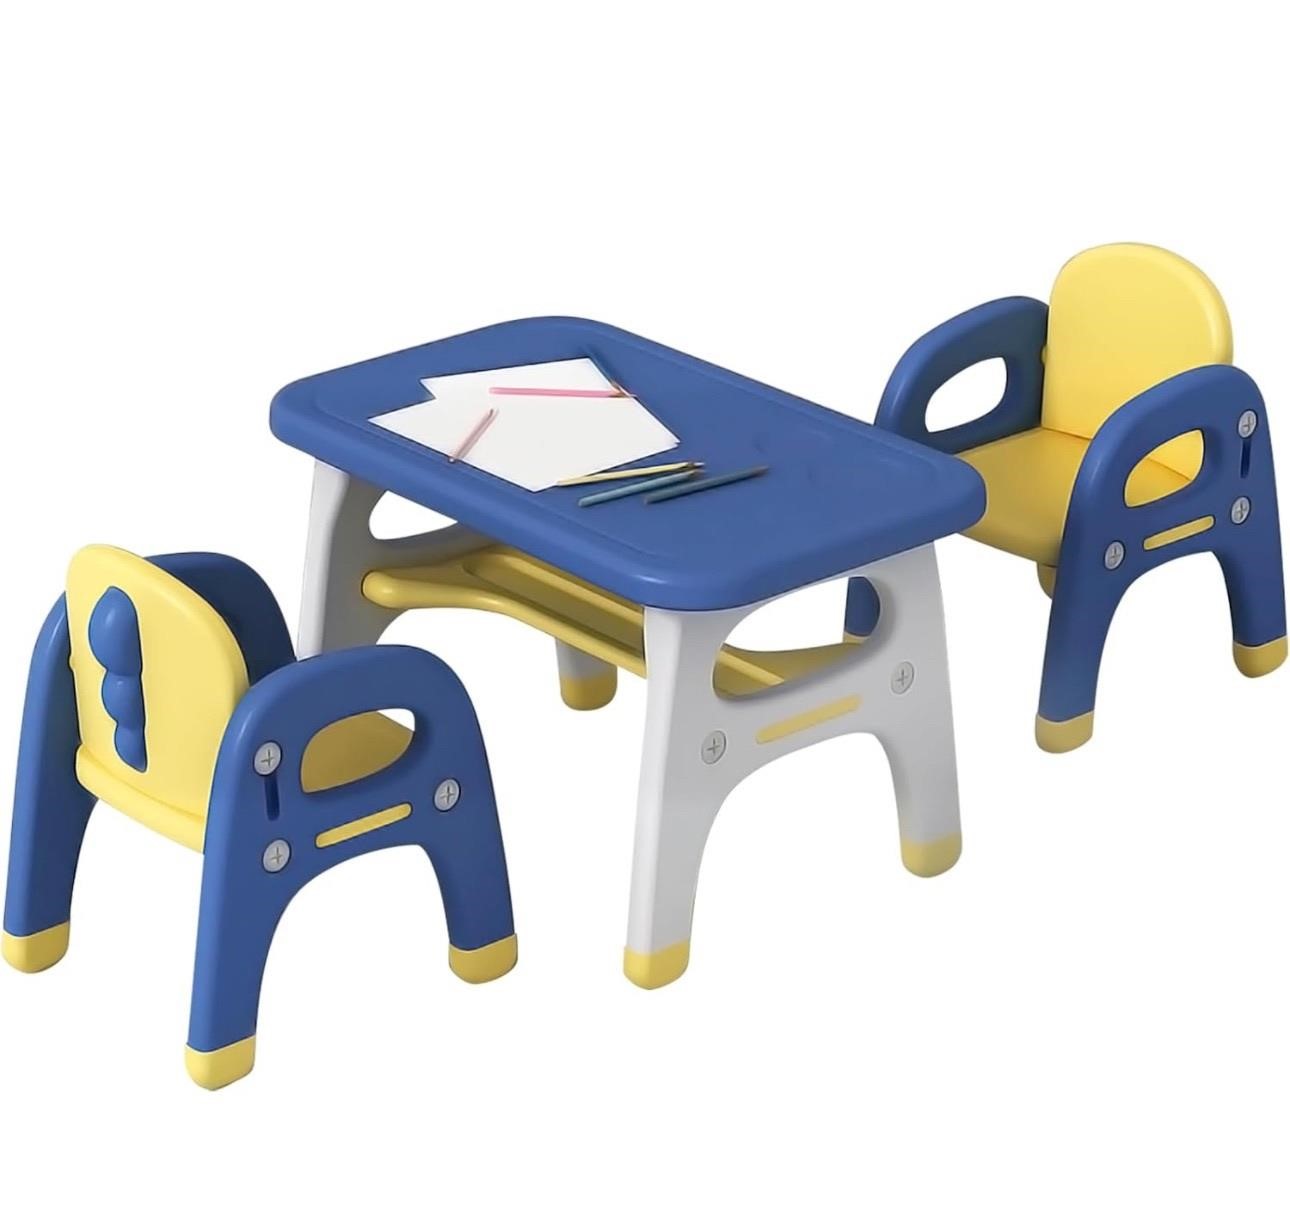 ($189) Kids Table and Chairs,Toddler Table